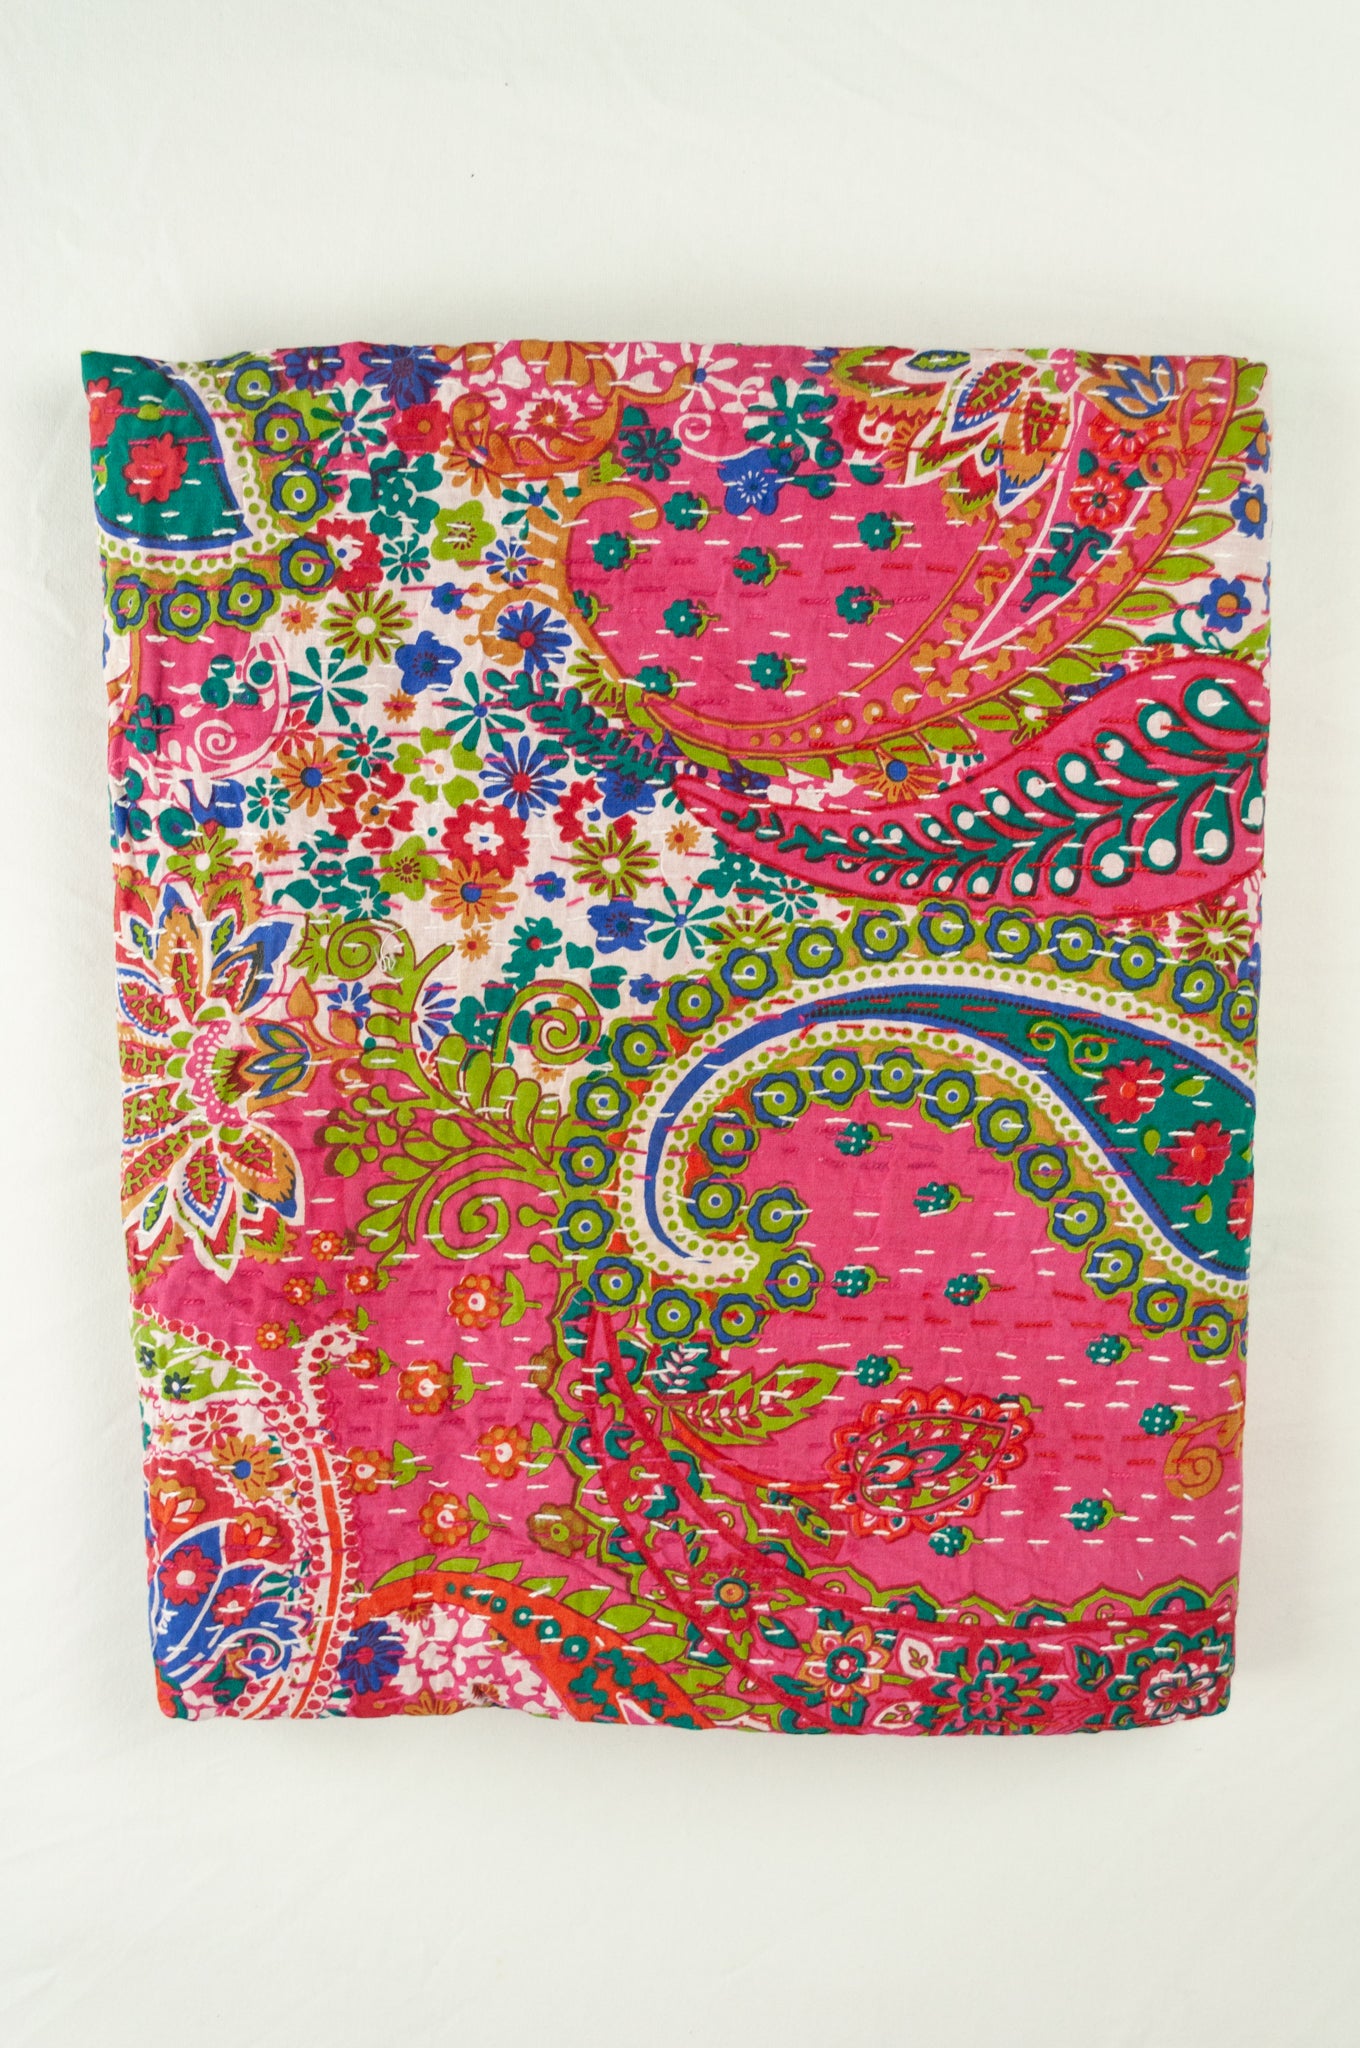 Handstitched cotton kantha quilt, a colourful paisley on a deep pink background, with highlights in lime, emerald, turquoise, white, and tan